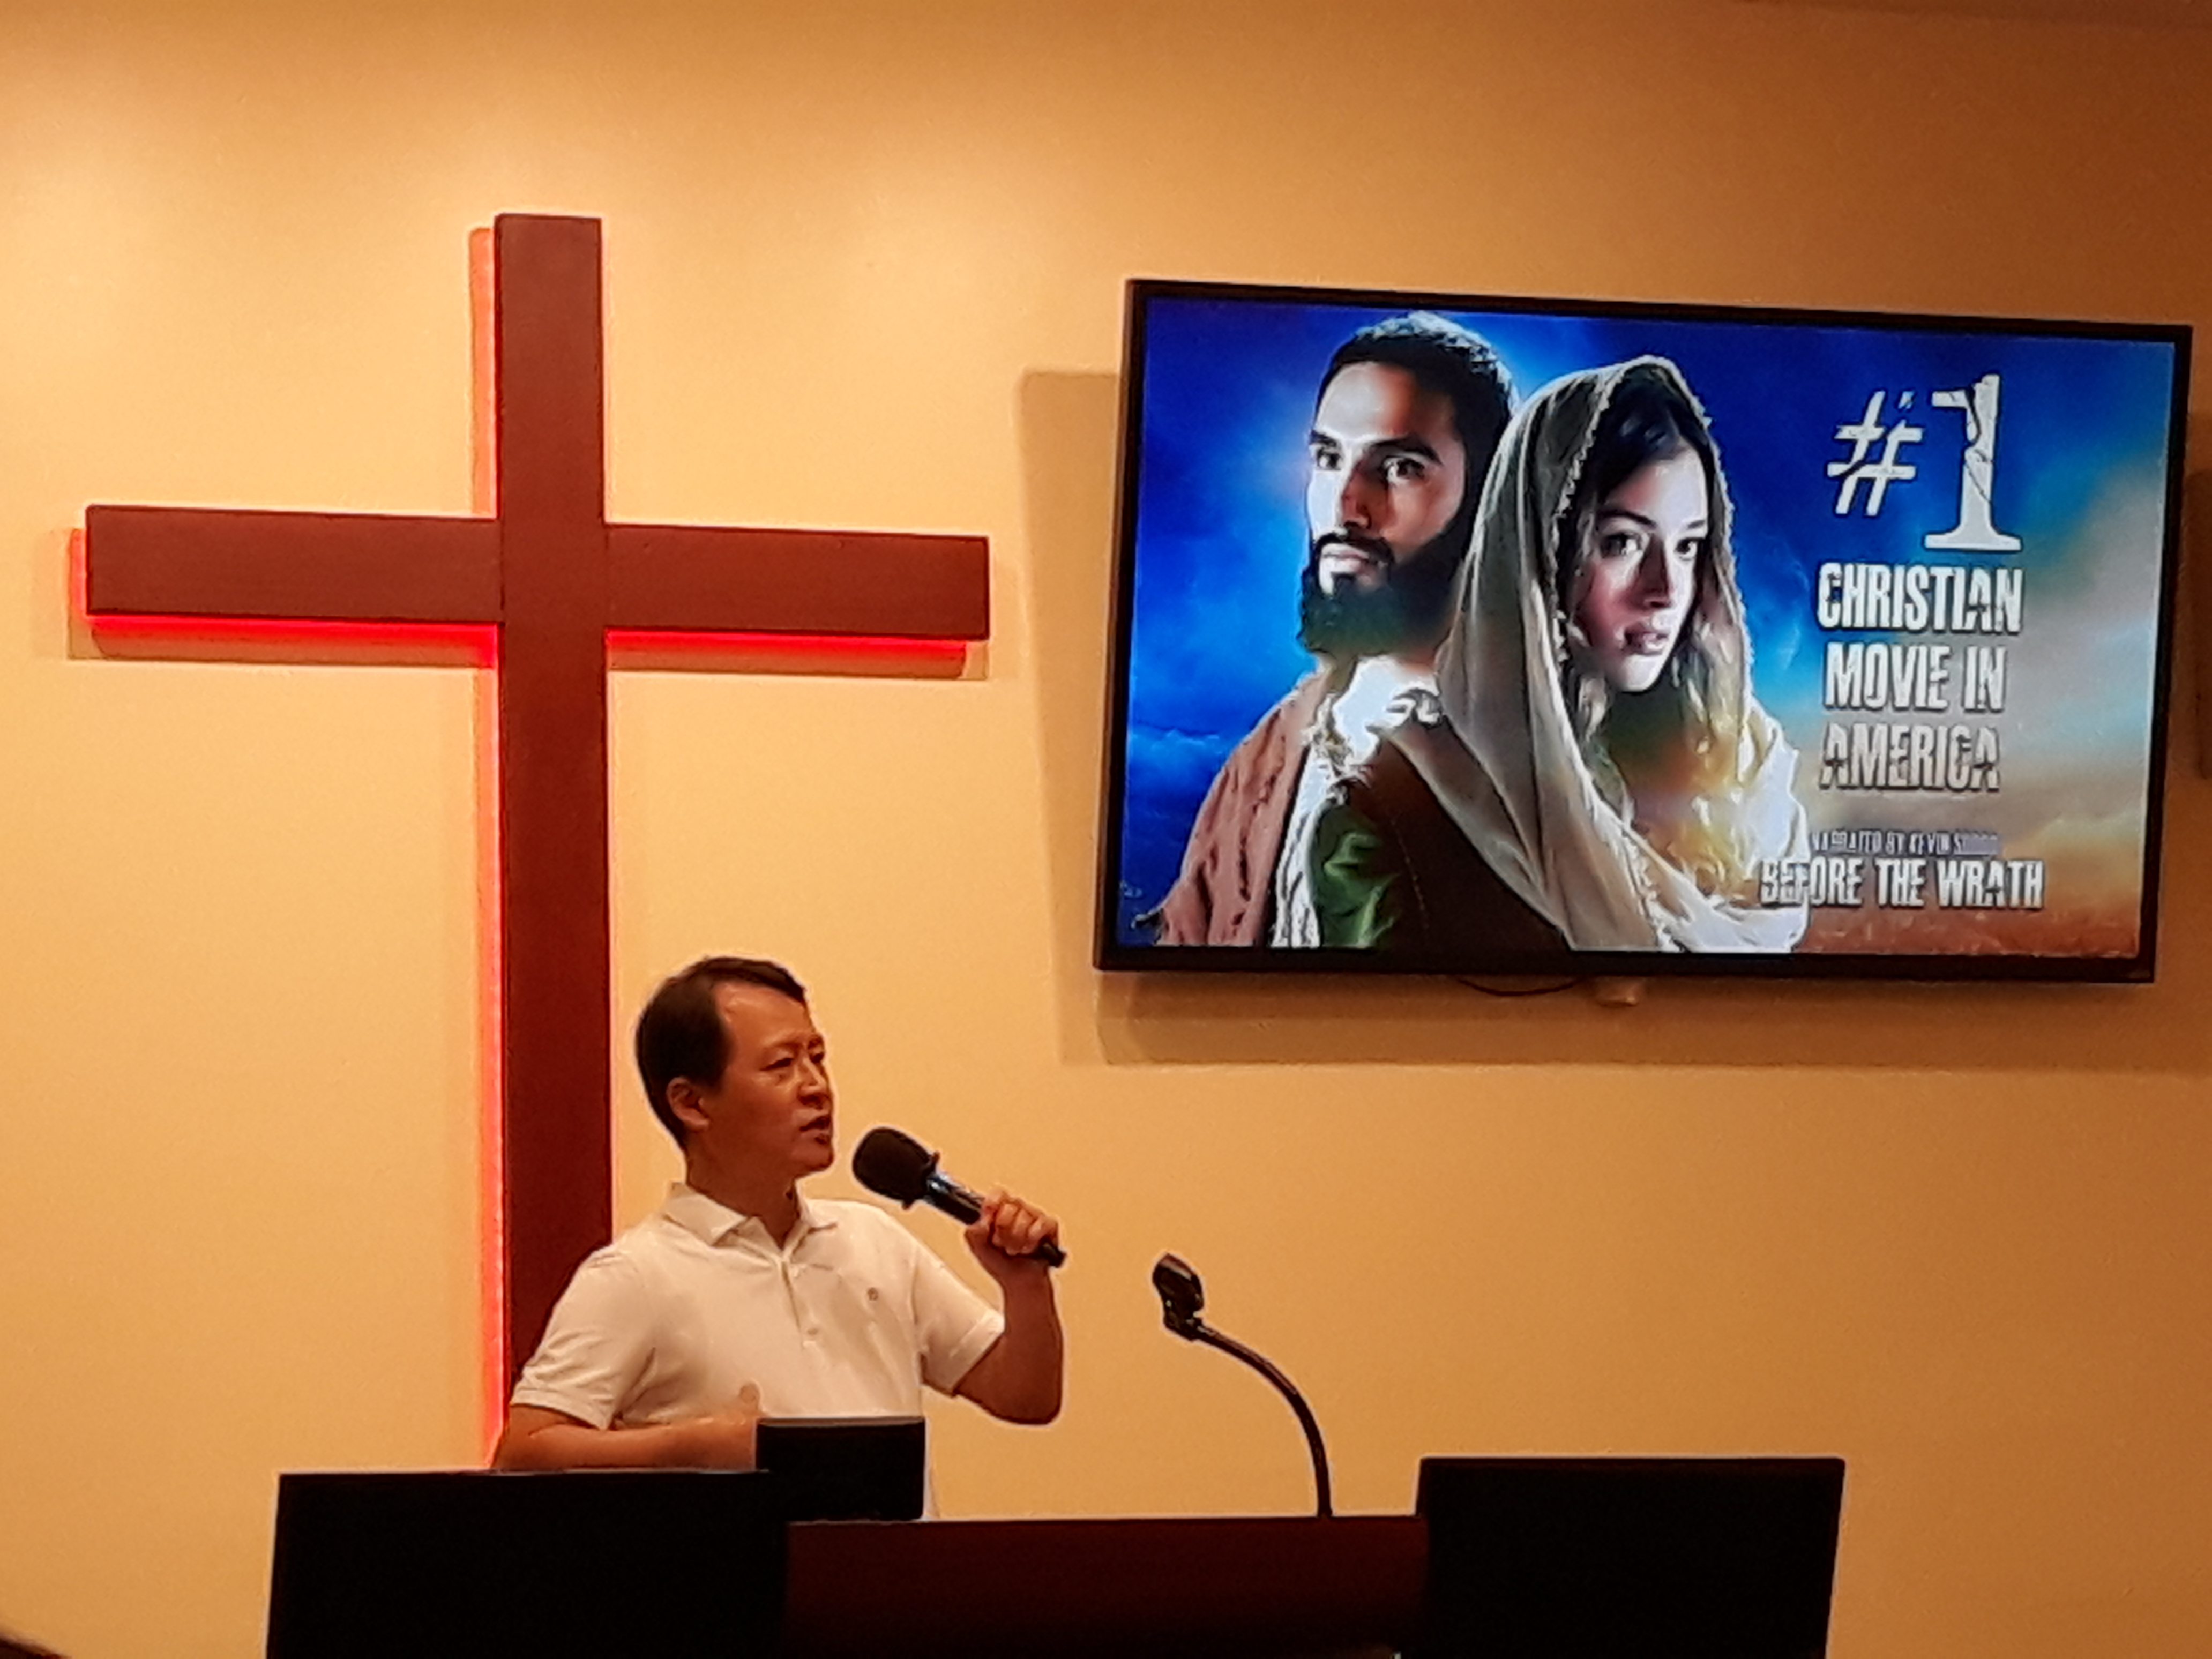 Pastor Cho is recommending a really good Christian movie for his church members to watch. It explains Jewish weddings during Jesus lifetime on Earth.